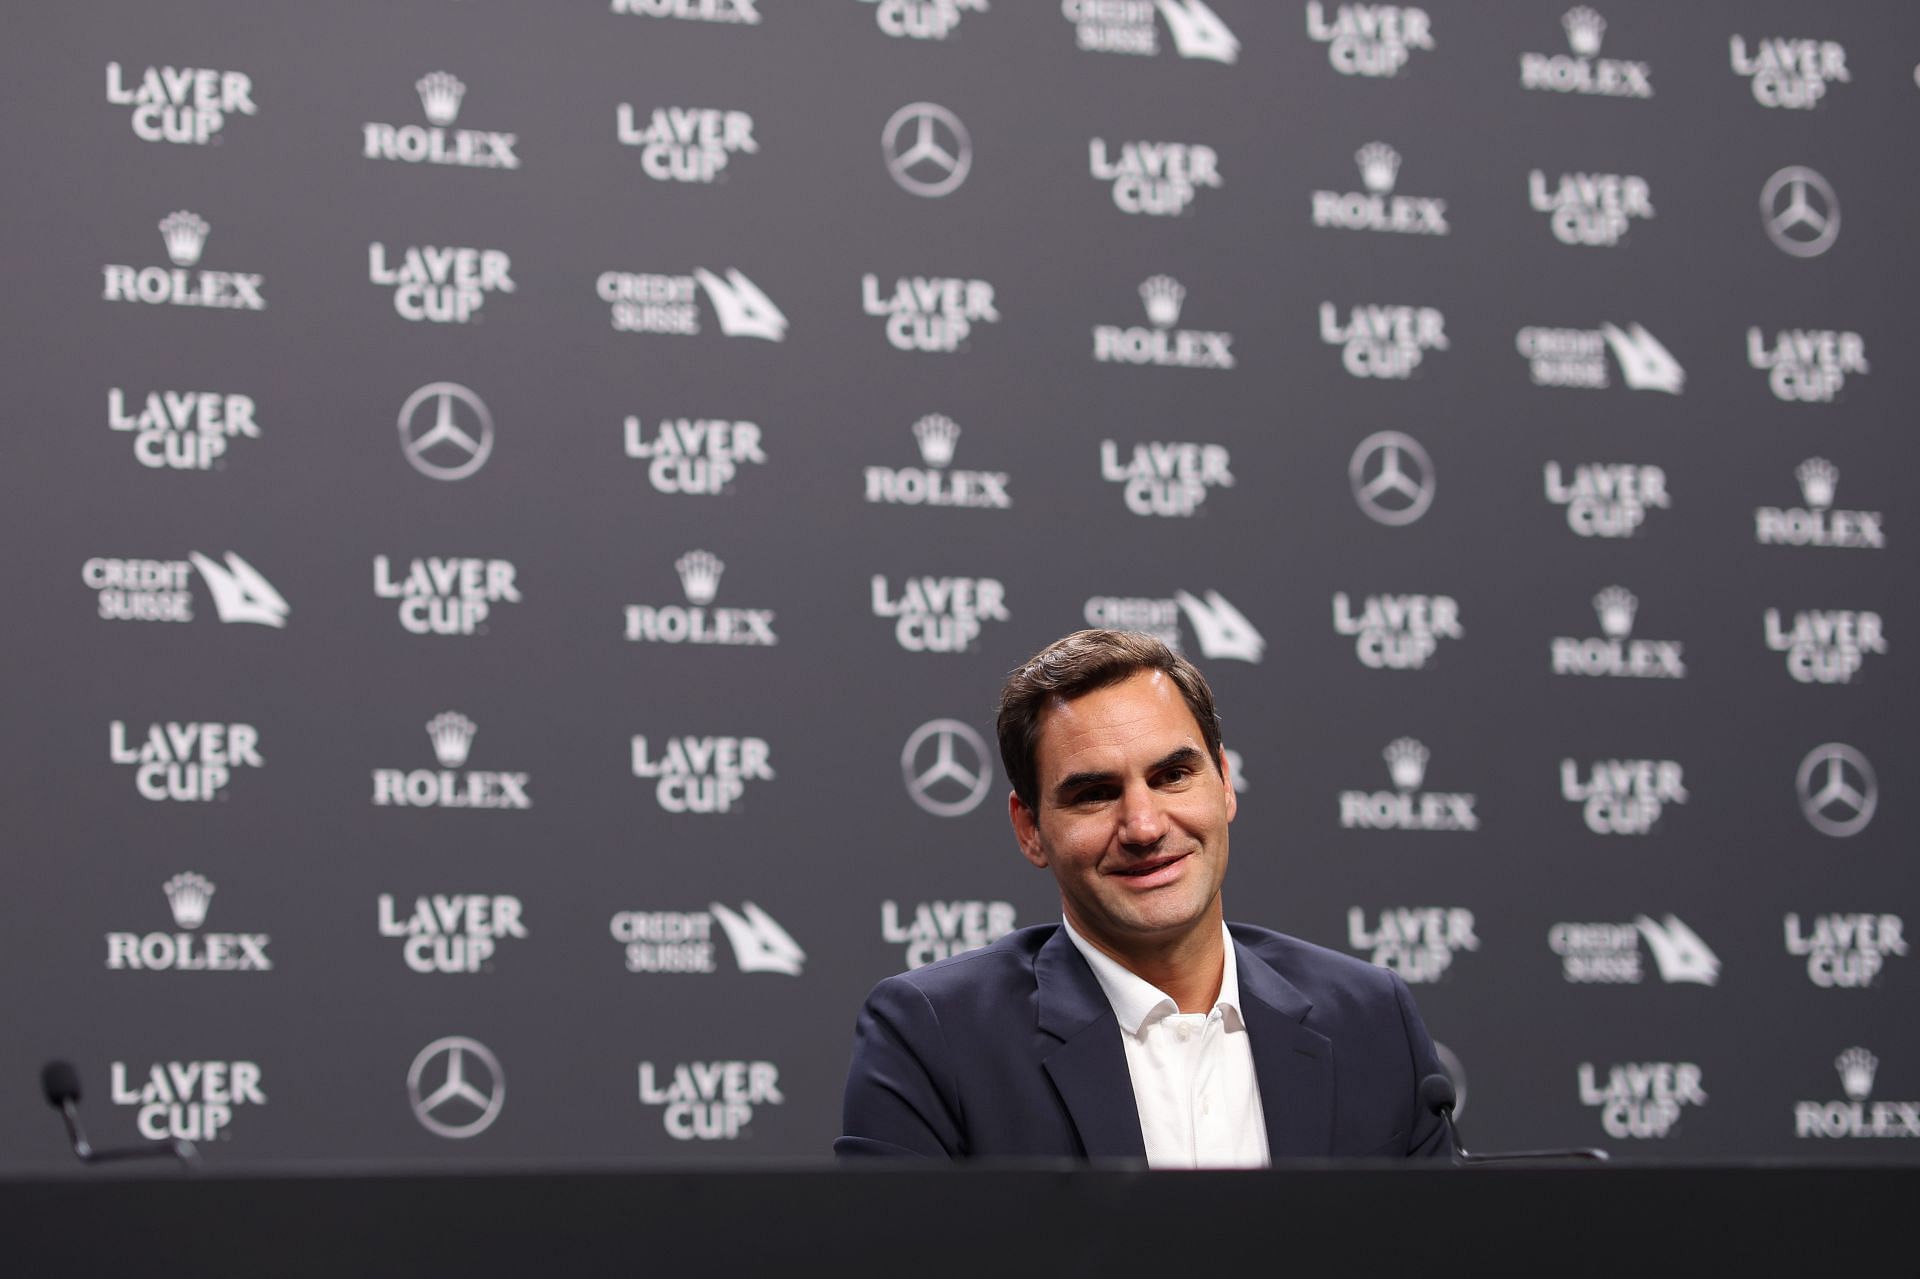 Roger Federer spoke at a press conference ahead of the 2022 Laver Cup.